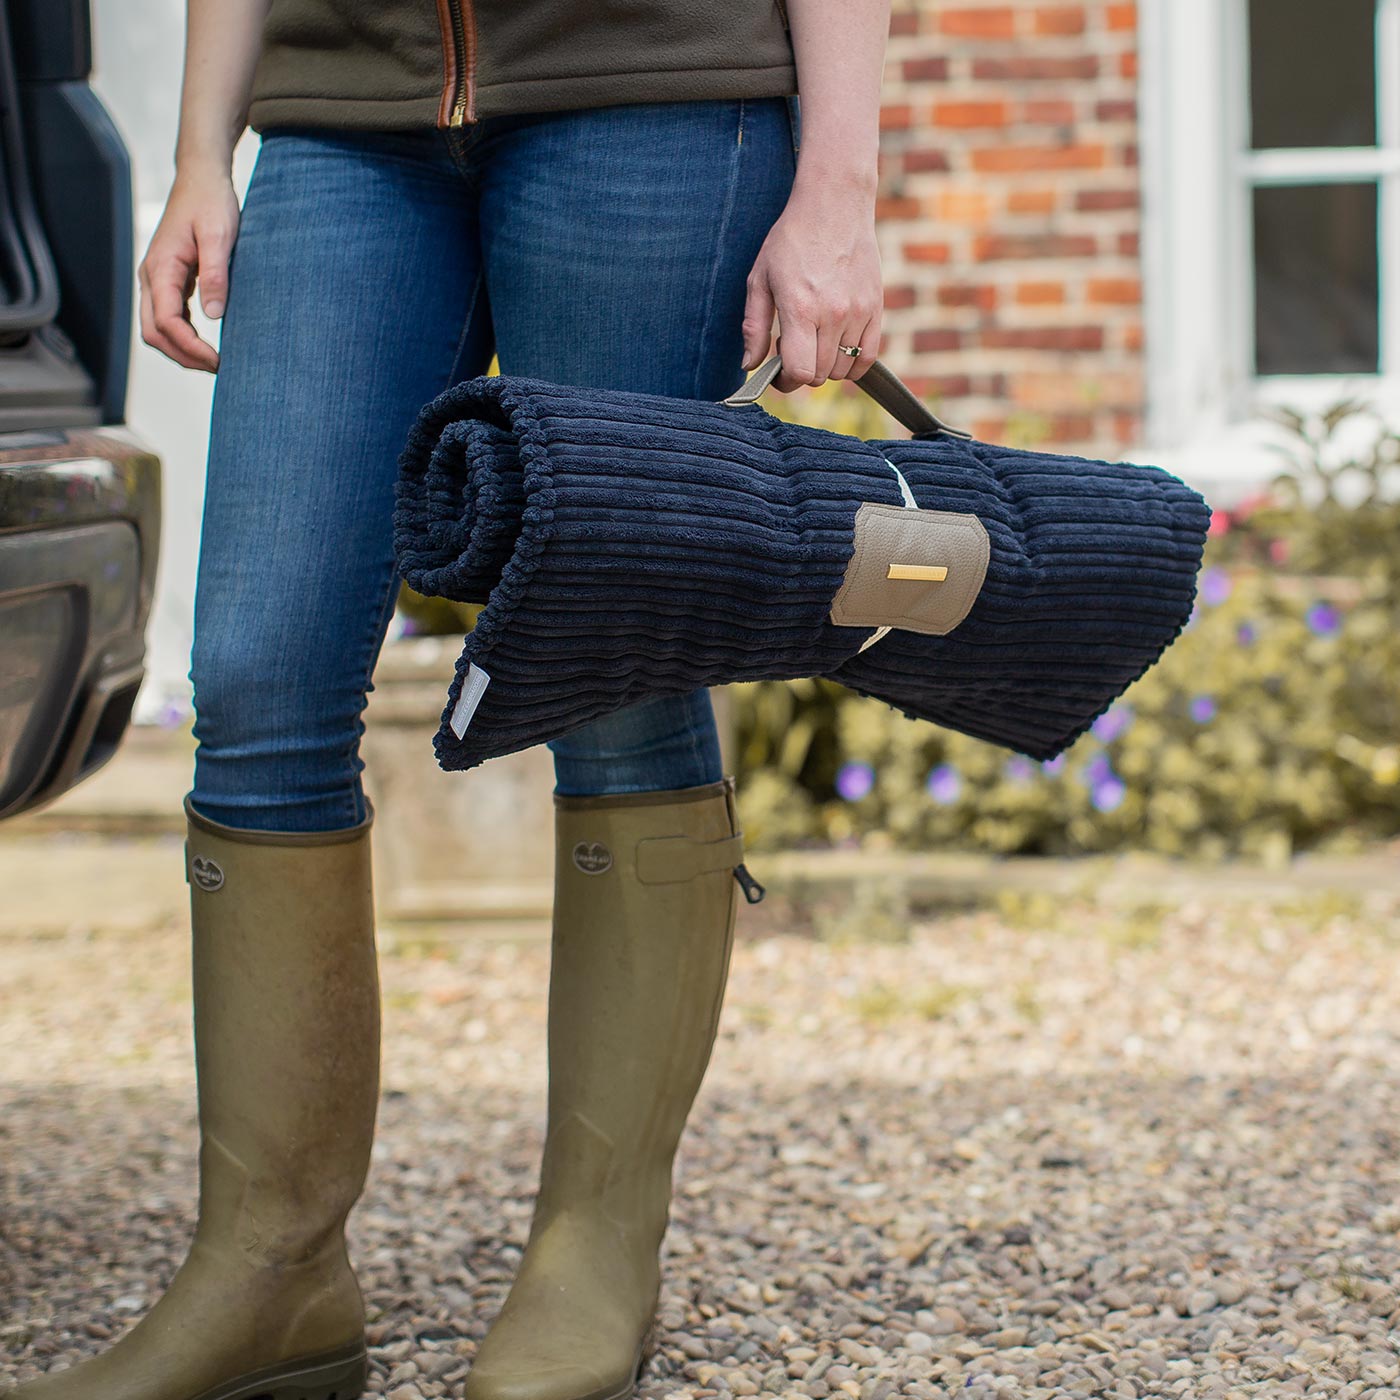 Embark on the perfect pet travel with our luxury Travel Mat in Essentials Navy. Featuring a Carry handle for on the move once Rolled up for easy storage, can be used as a seat cover, boot mat or travel bed! Available now at Lords & Labradors